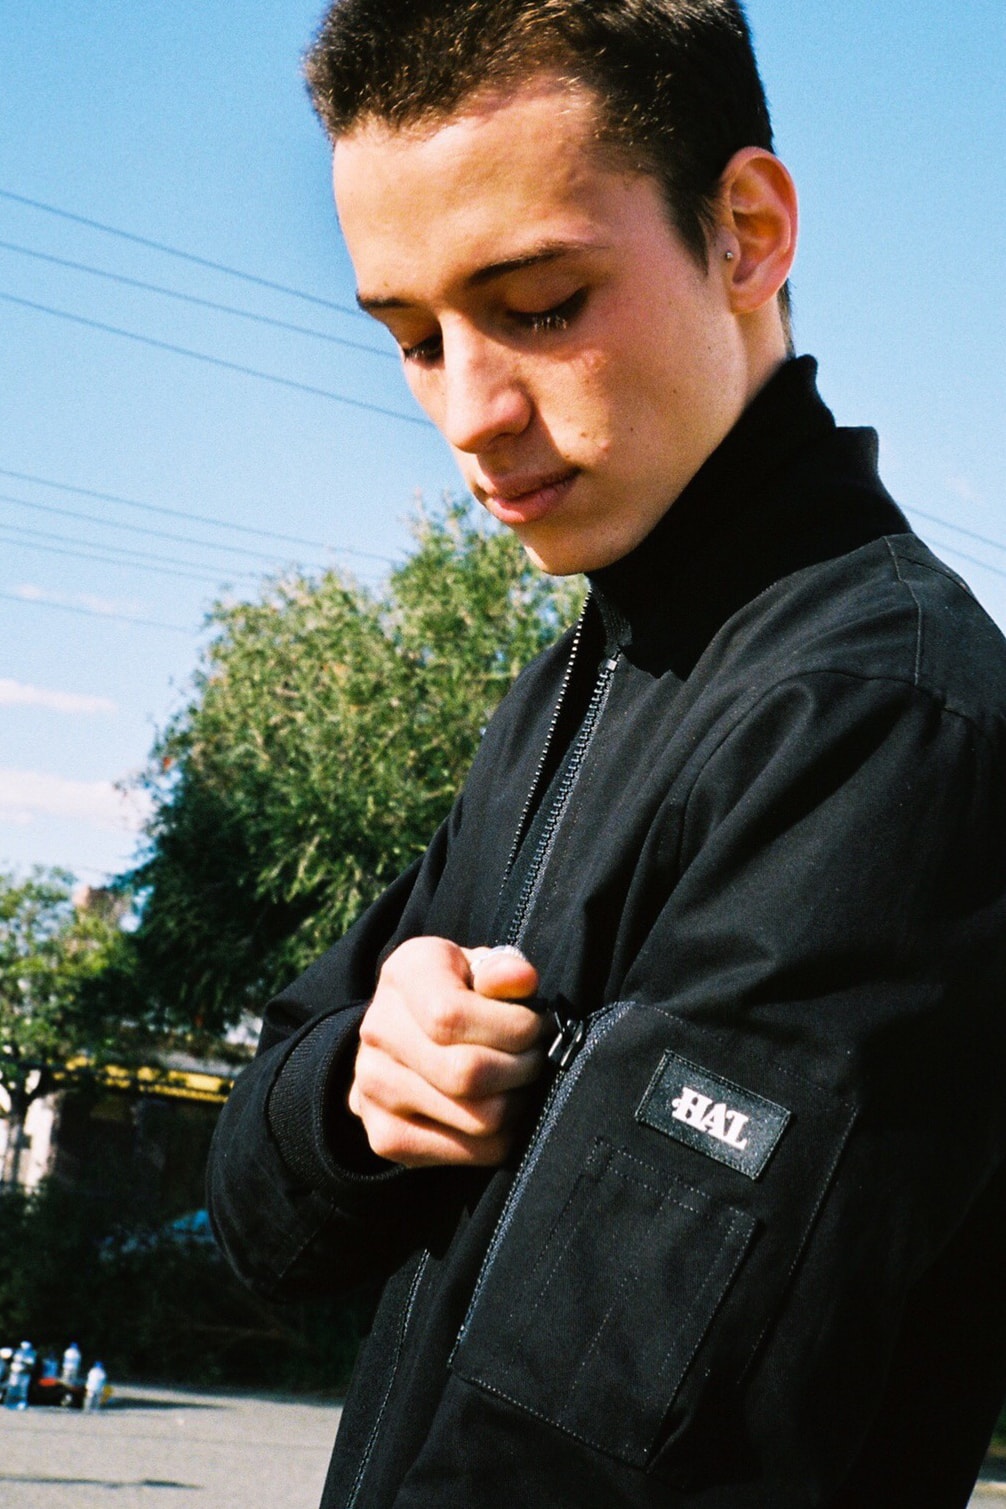 Highs and Lows 2016 Spring Lookbook